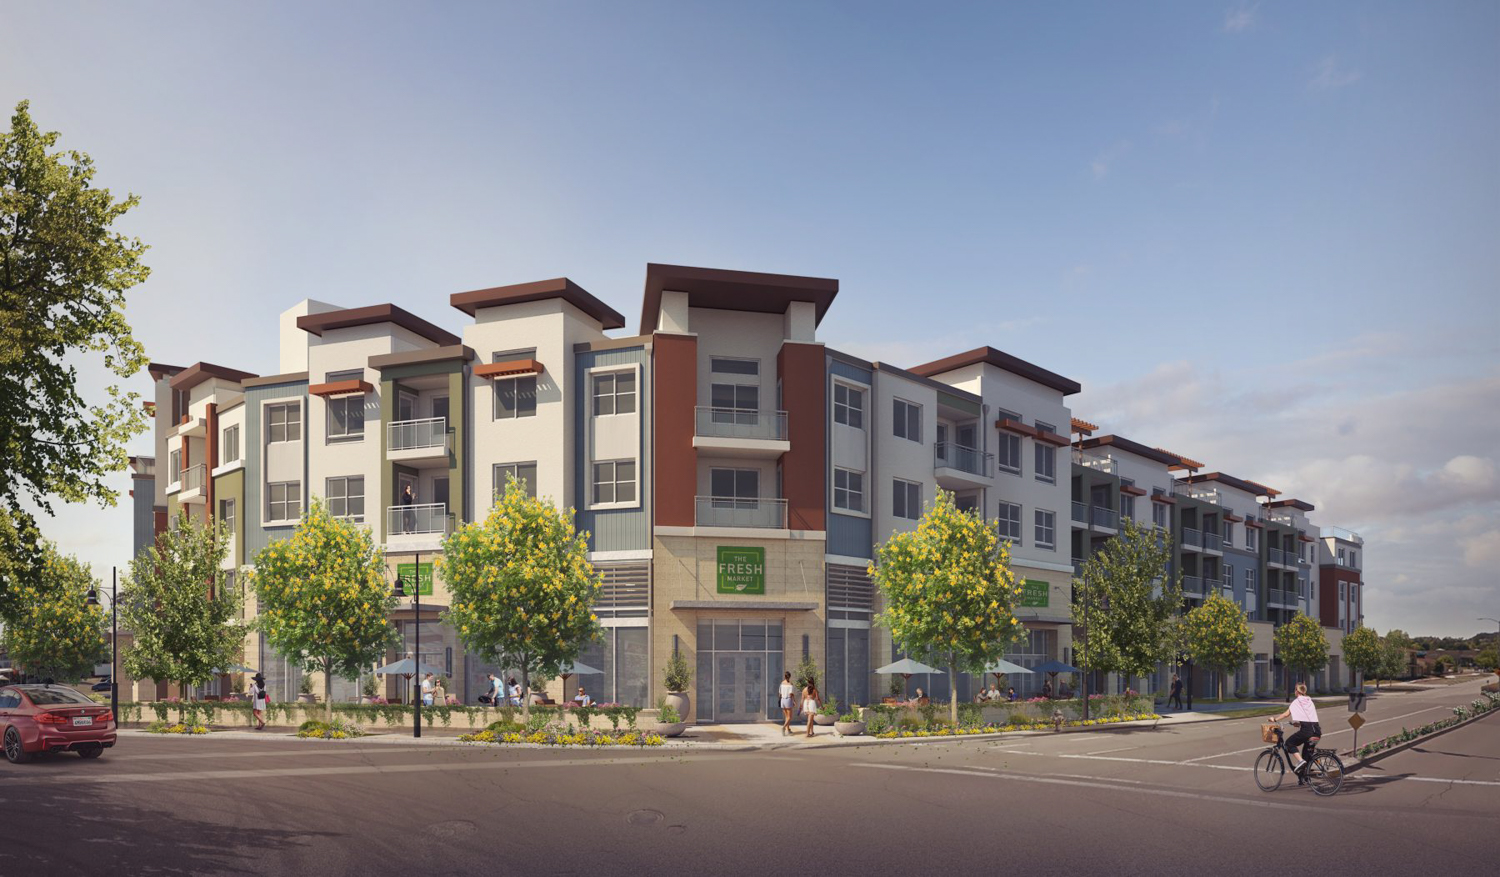 2251 San Ramon Valley Boulevard apartment proposal, design by Withee Malcolm Architects